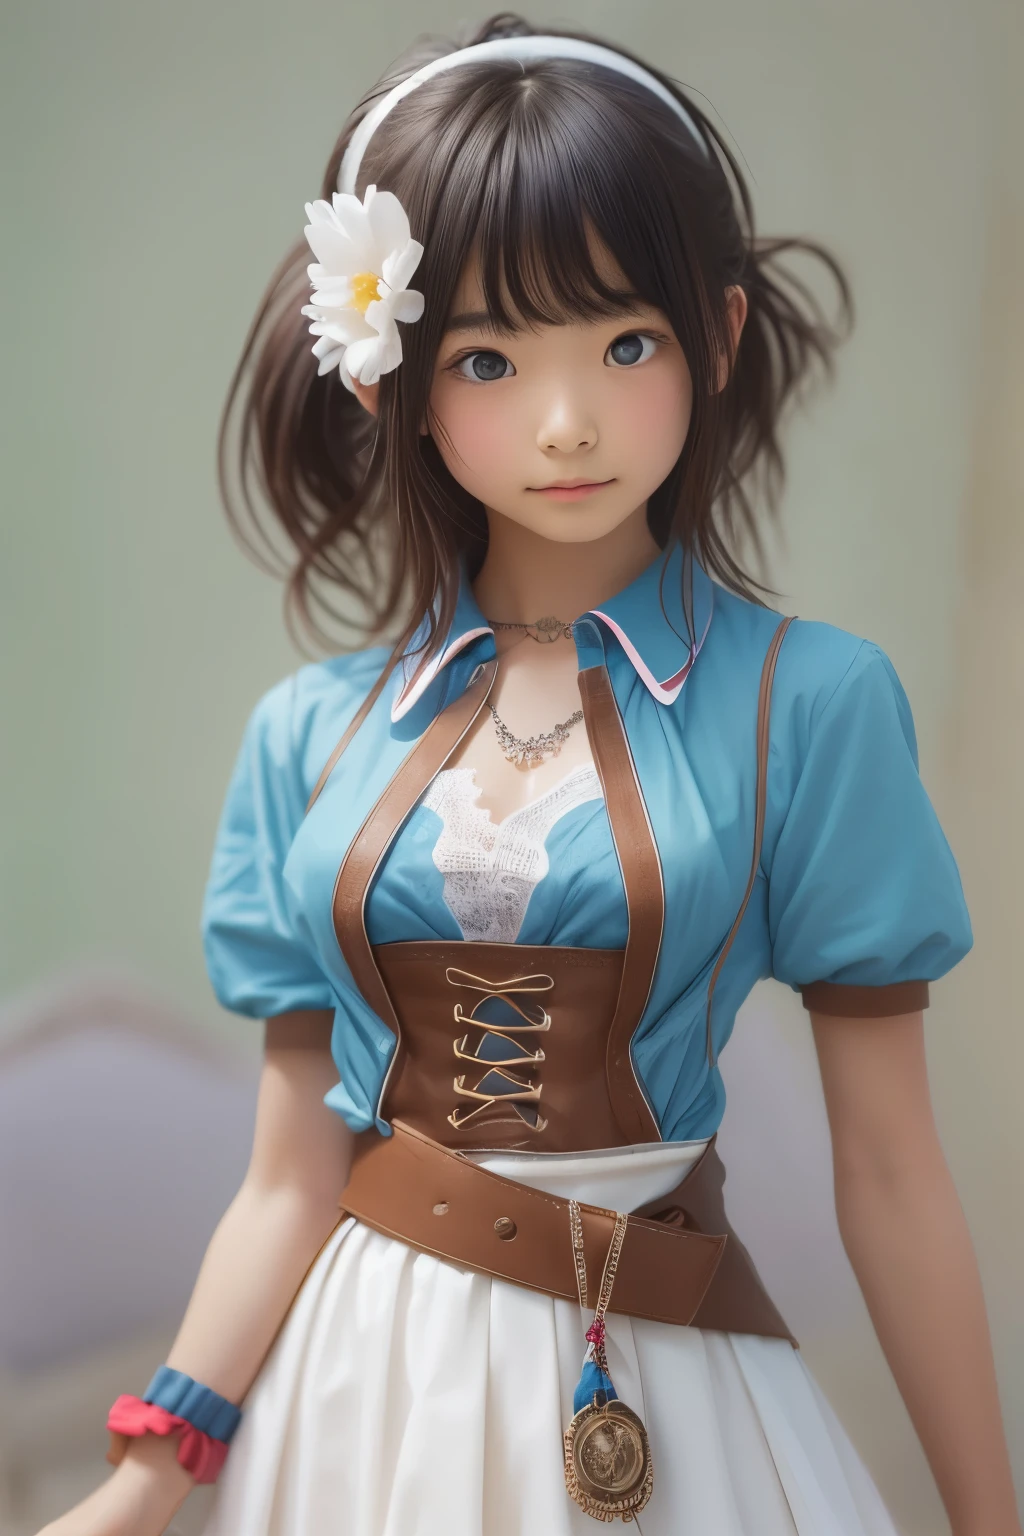 ((sfw: 1.4)), (sfw,She is wearing a long white embroidered skirt, a red blouse with lace, a white apron tied around her waist, blue socks, and brown leather shoes.A blue scarf is on her head. Yes, her accessories include necklaces, earrings, and bracelets. short-hair, 1 Girl)), Ultra High Resolution, (Realistic: 1.4), RAW Photo, Best Quality, (Photorealistic Stick), Focus, Soft Light, ((15 years old)),  ((Japanese)), (( (young face))), (surface), (depth of field), masterpiece, (realistic), woman, bangs, ((1 girl))